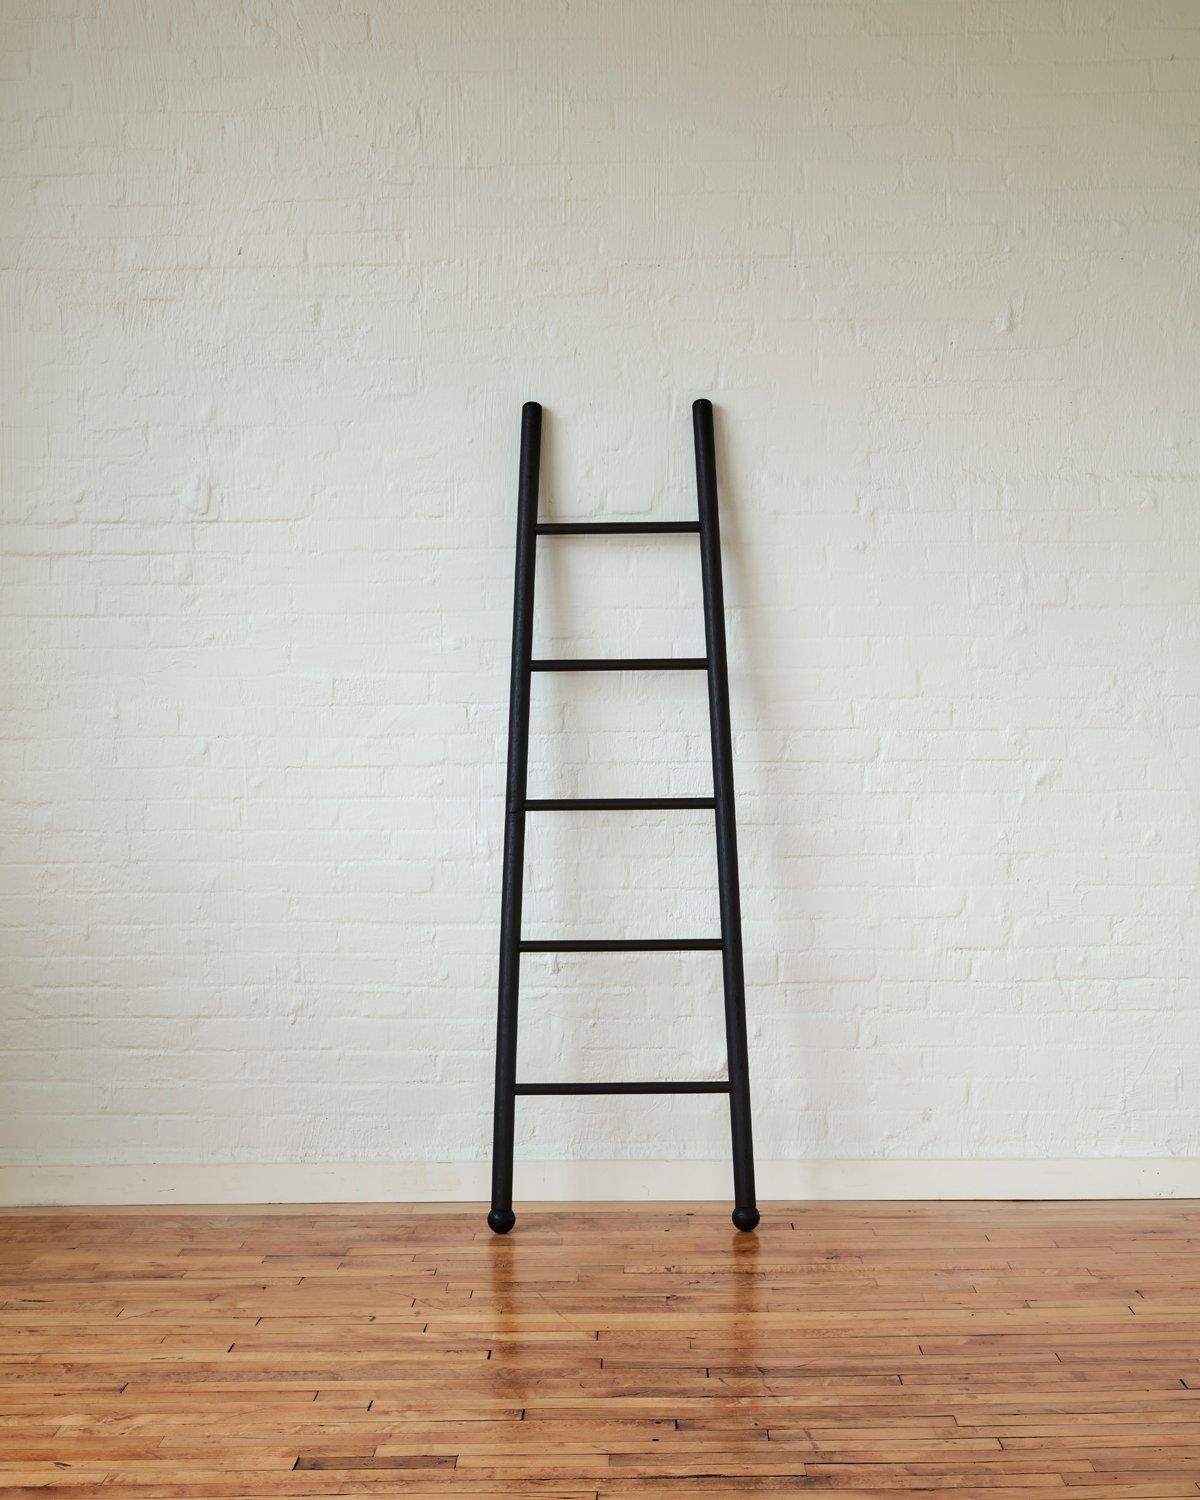 Our Black Bloak Ladders are made of solid white oak finished with ink to blacken them while still letting the natural beauty of the wood grain come through. We use them to display blankets, towels or scarves. Great at the beach house for bathing